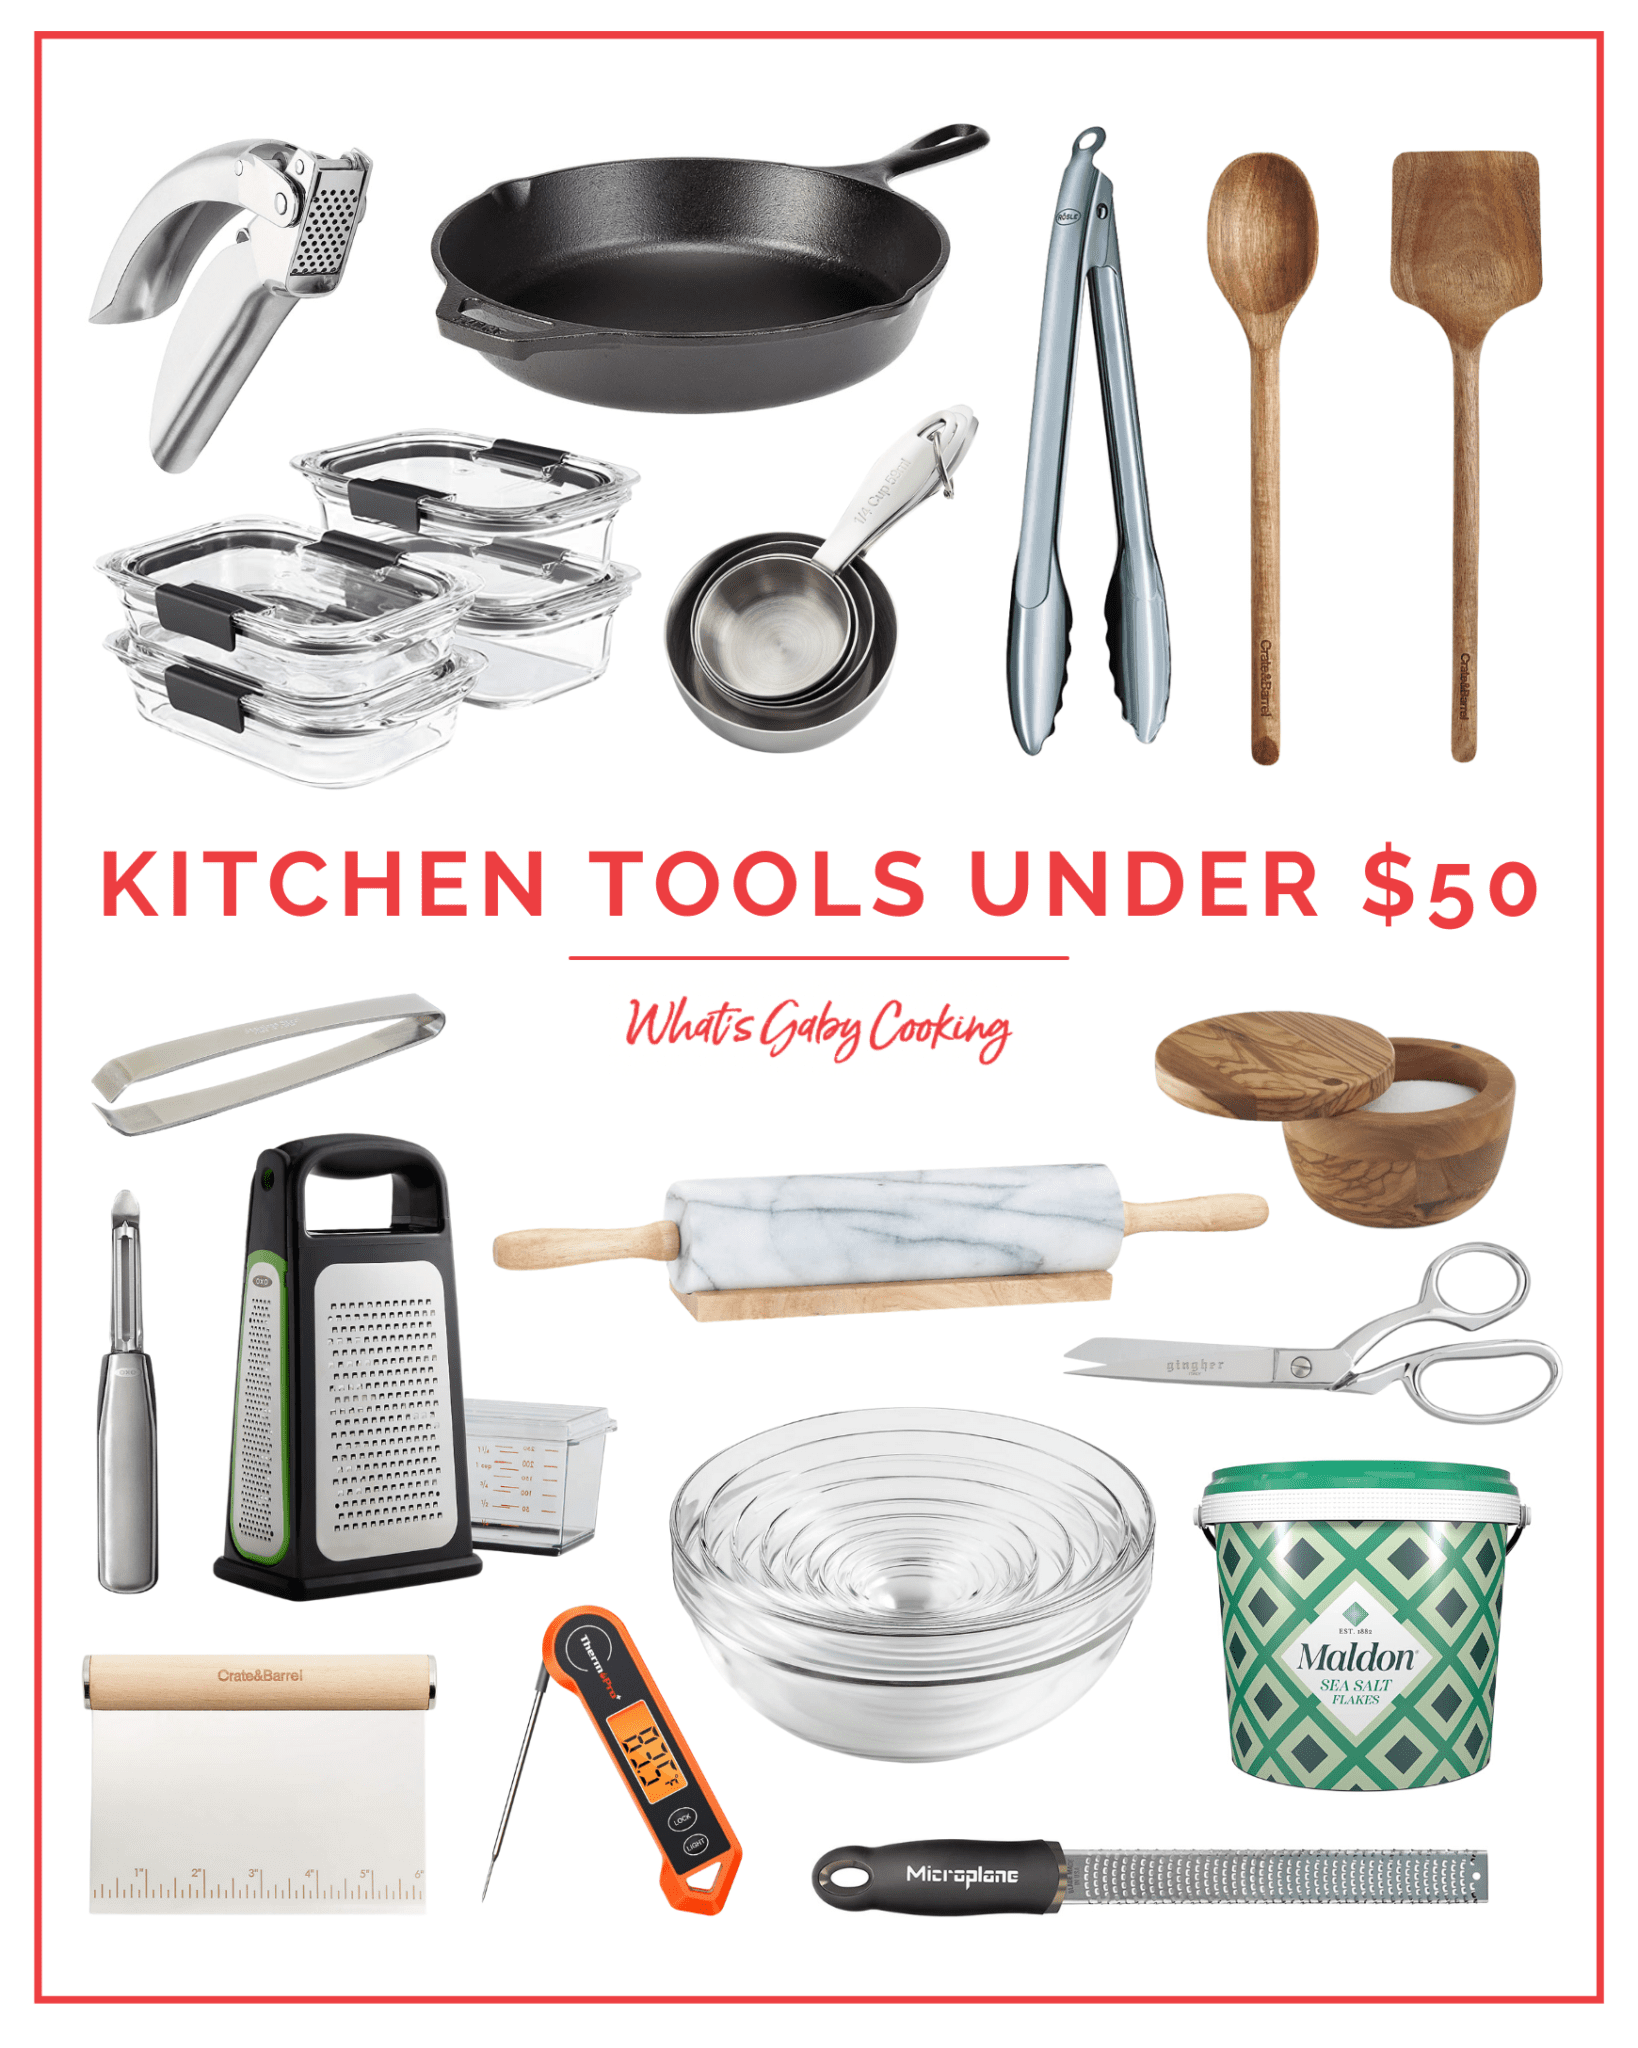 Kitchen Tools Under $50 Gift Guide